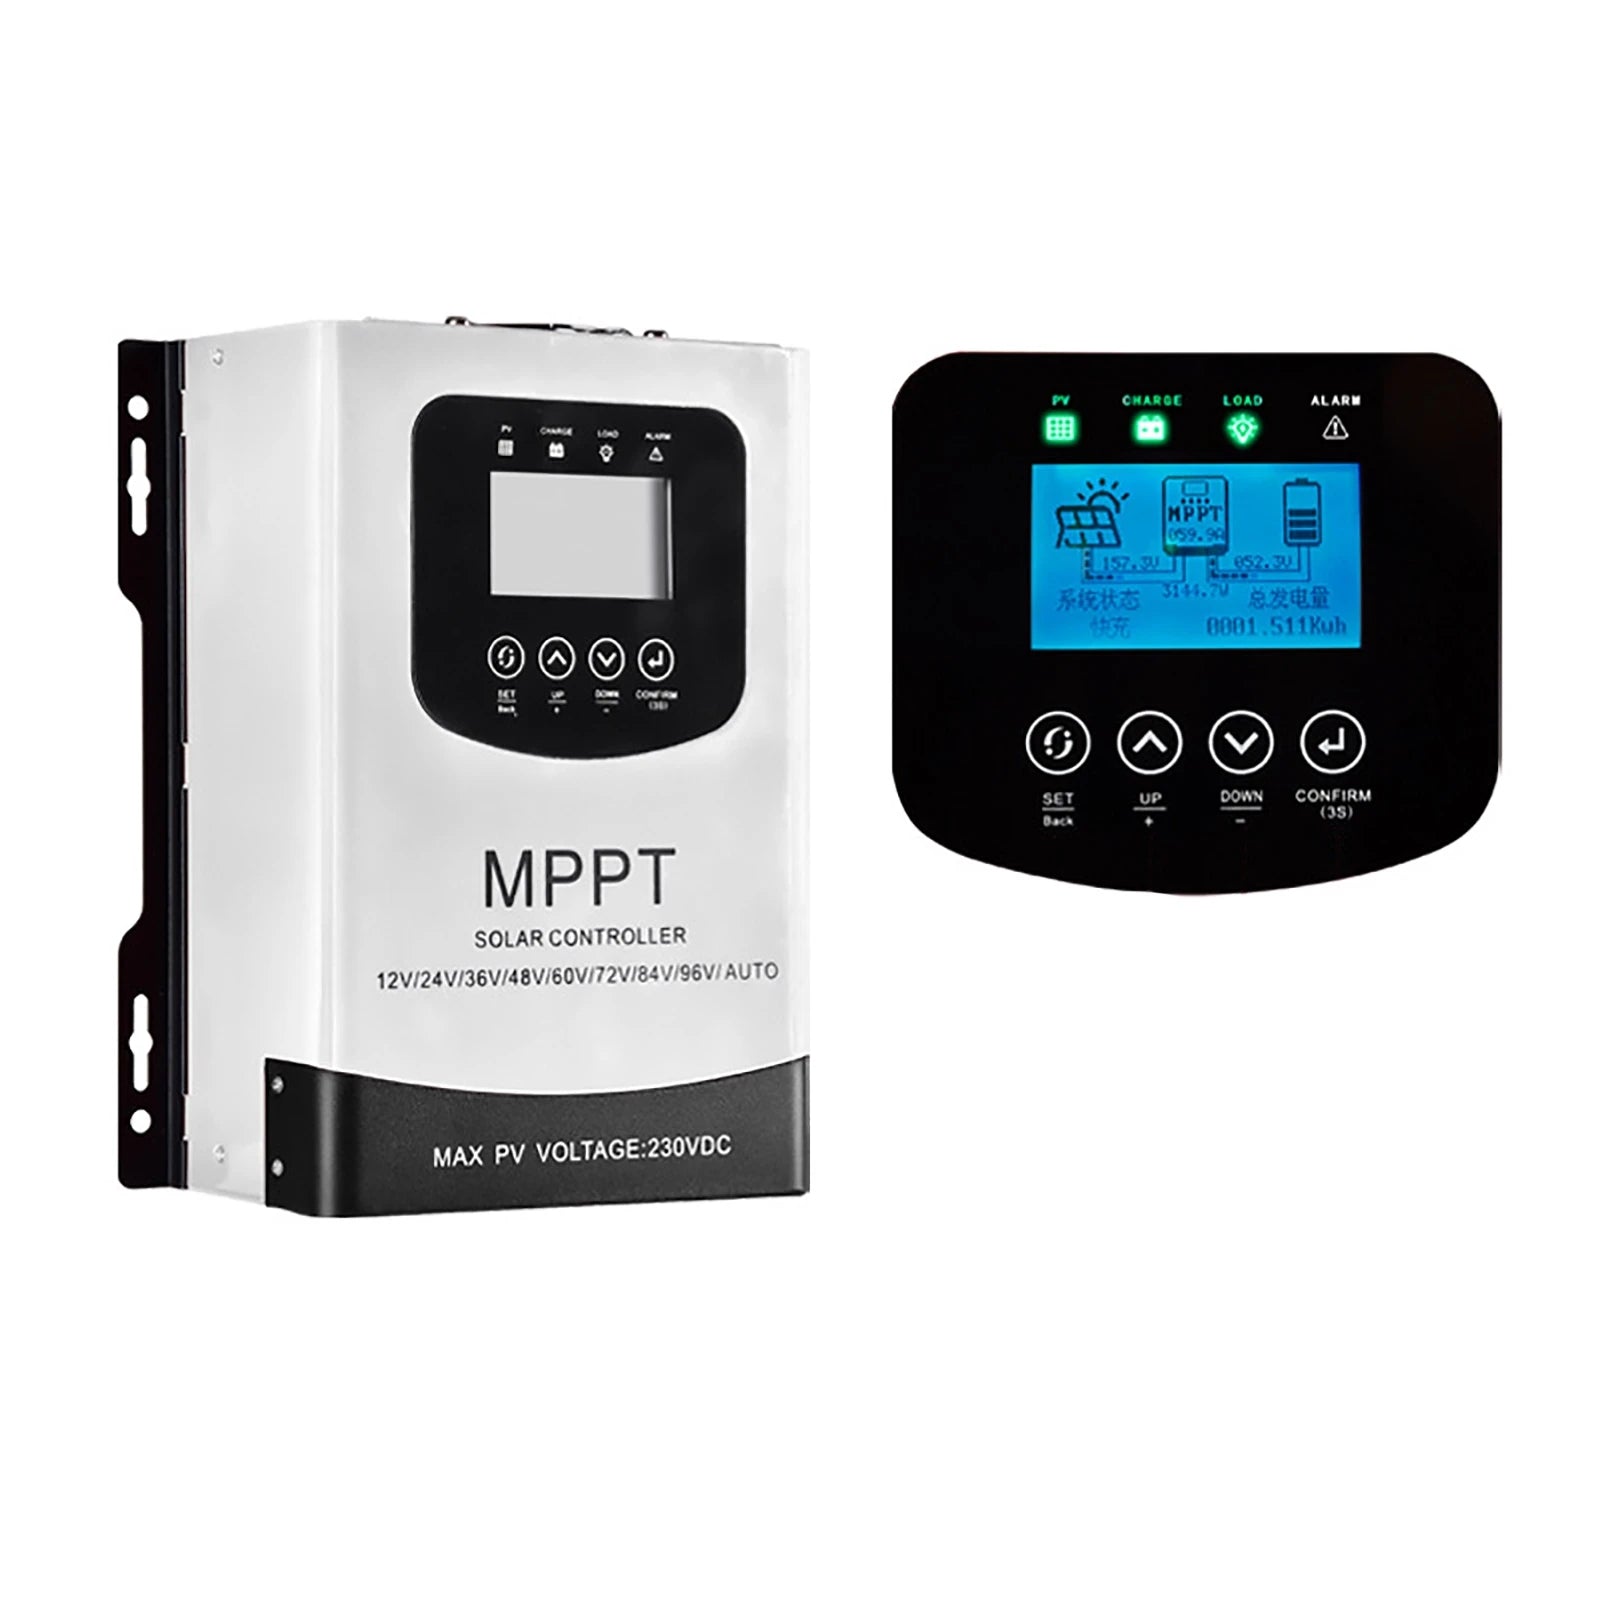 50A 60A MPPT Solar Charge Controller, Smart Alert: Overload Protection - Solar Charge Controller for 12-72V Battery Systems with Auto MAX PV Voltage Mode.